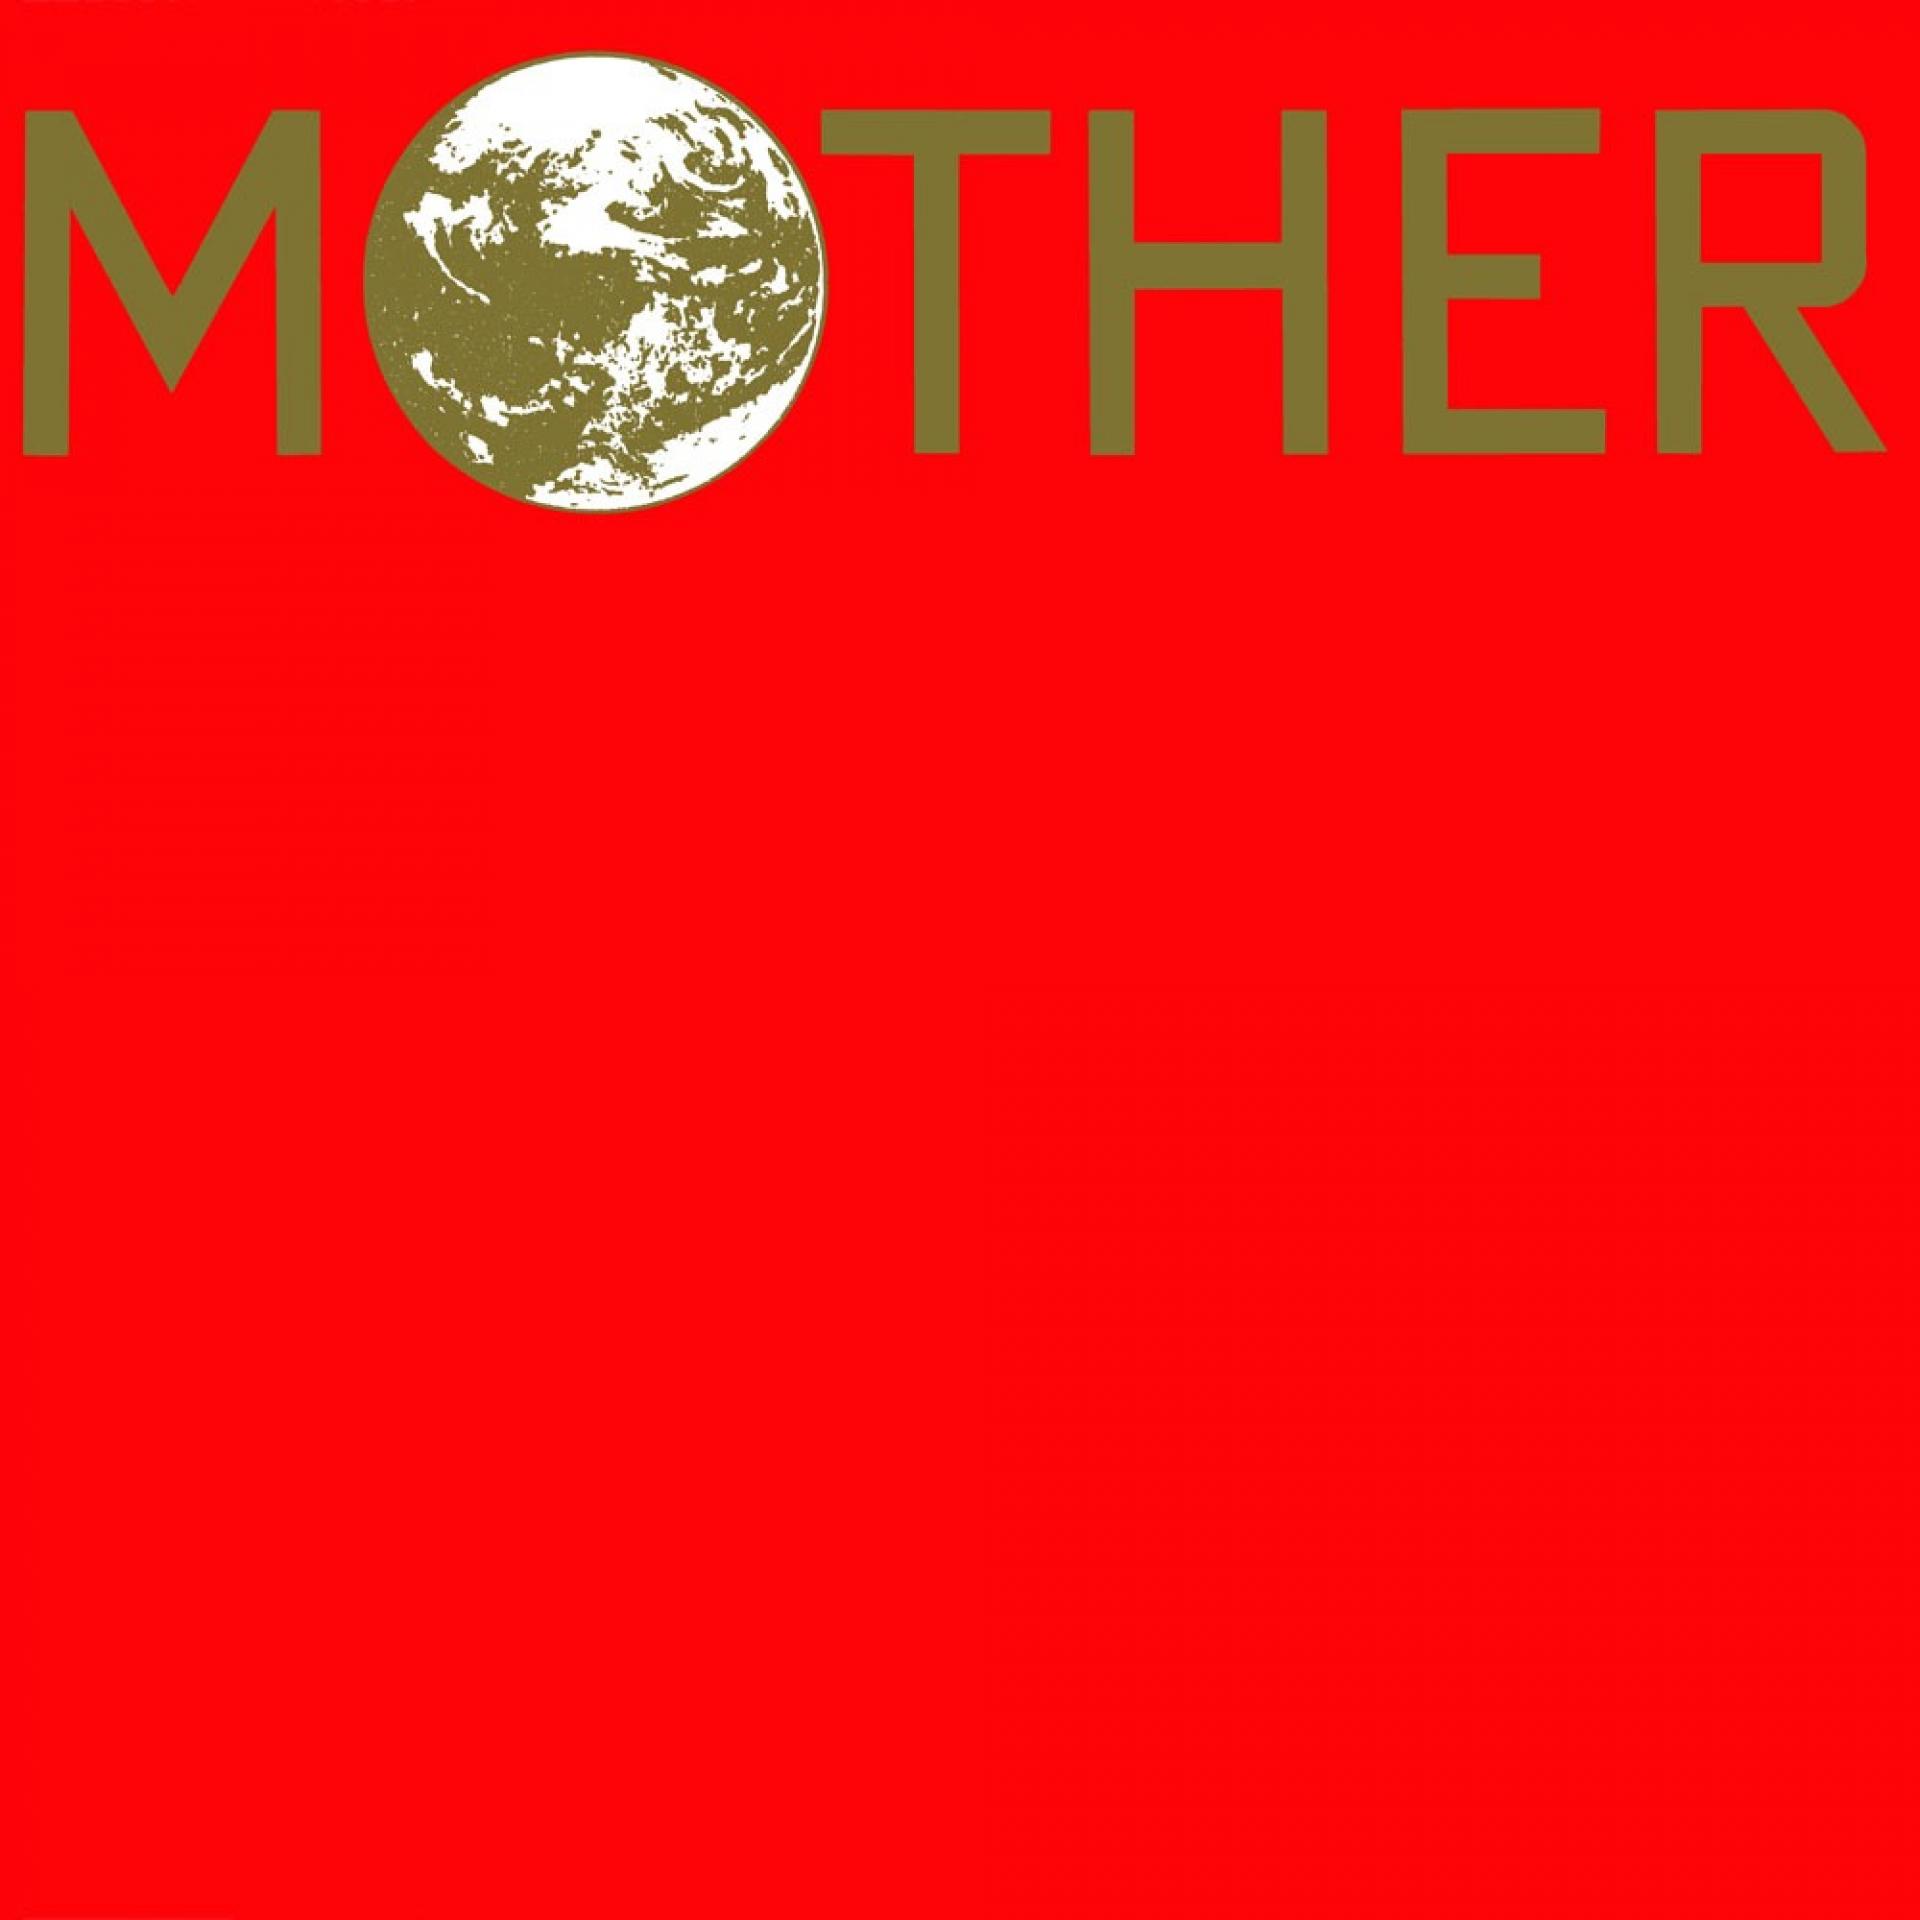 Mother Mother - Albums, Songs, and News